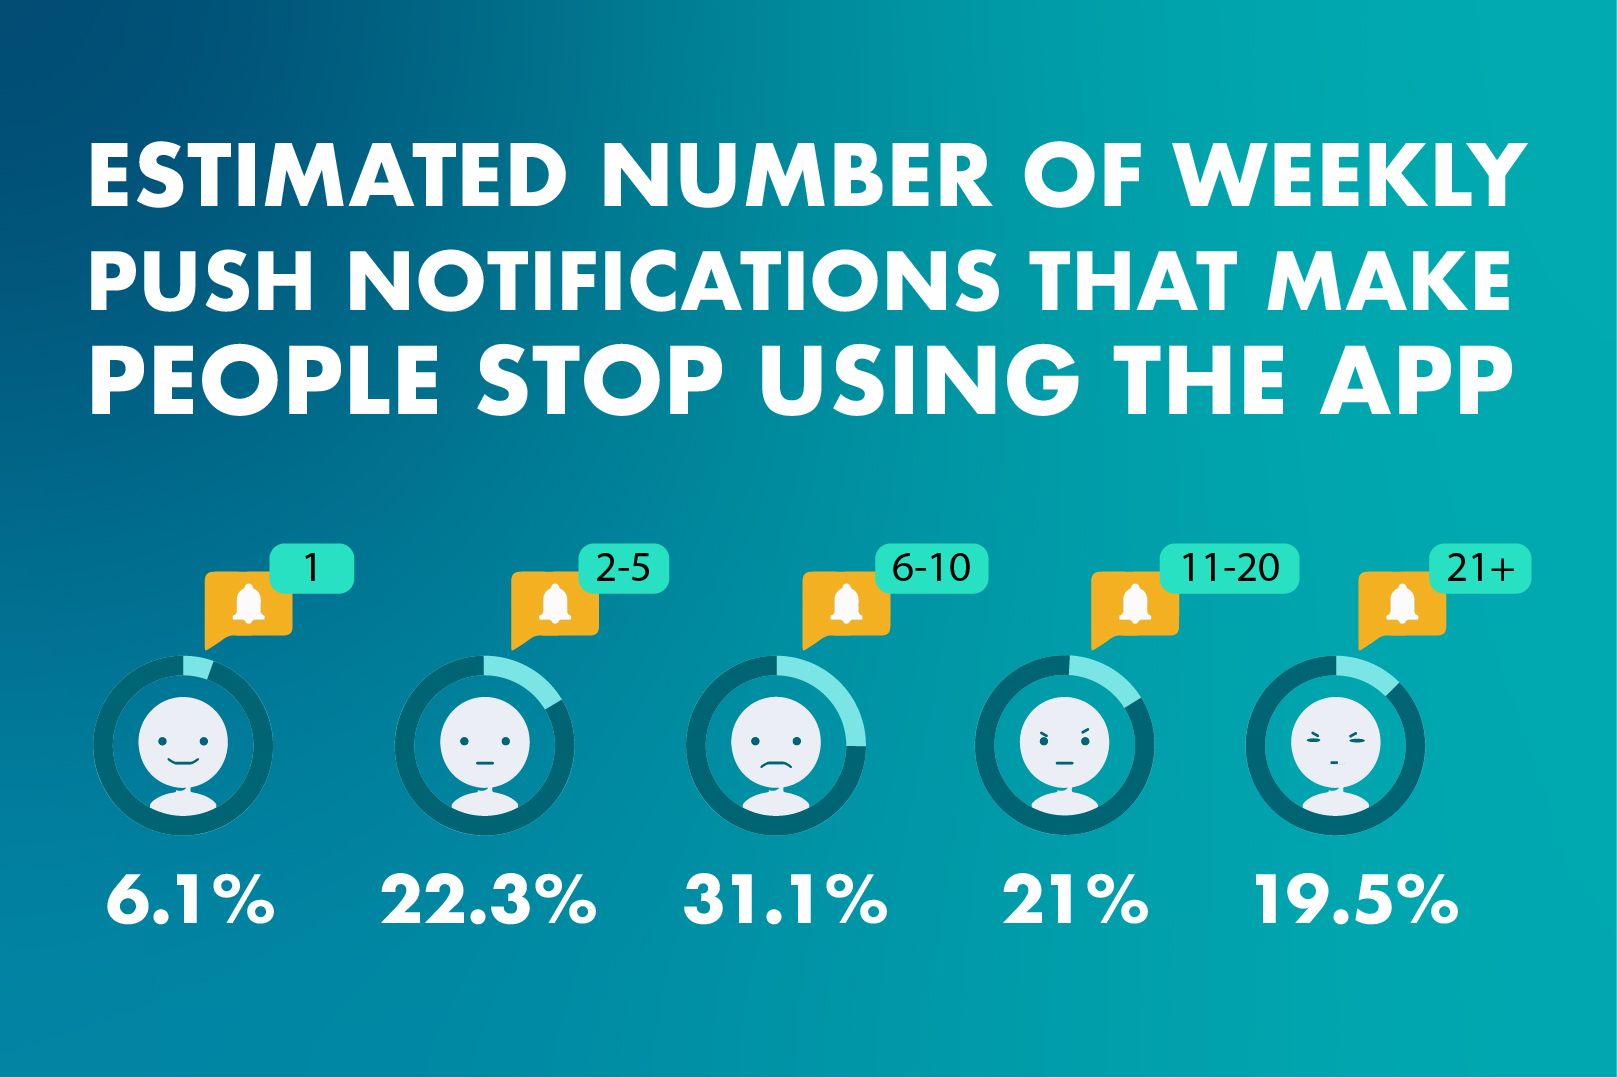 Estimated number of weekly push notifications that make people stop using the app